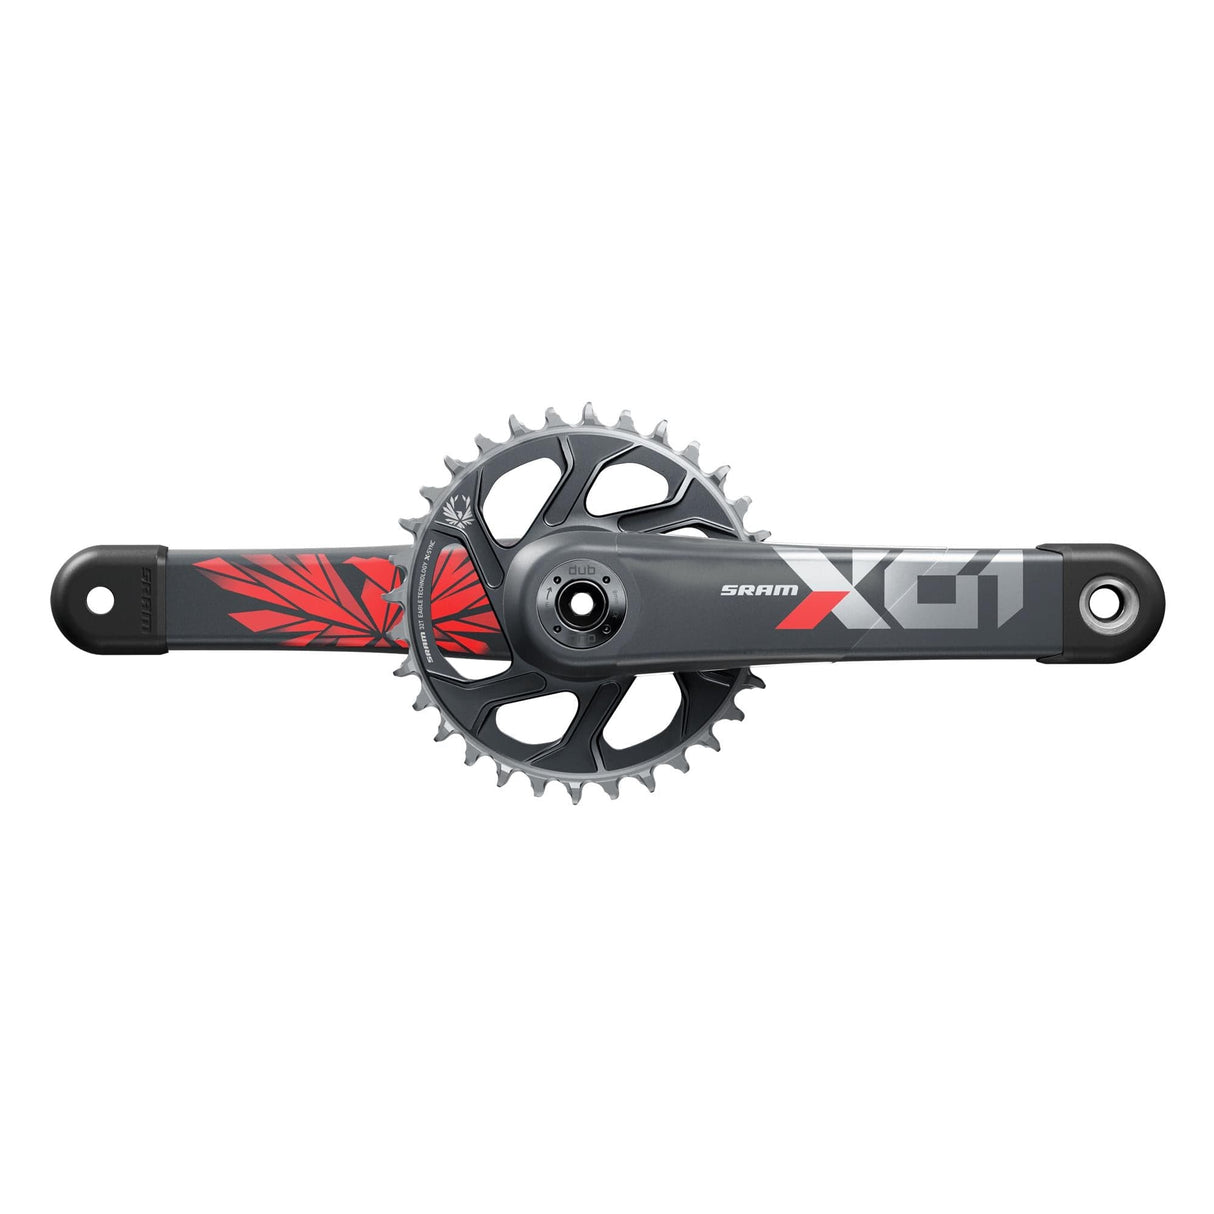 Sram Crankset X01 Eagle Dub 12S W Direct Mount 32T X-Sync 2 Chainring (Dub Cups/Bearings Not Included) C3: Lunar Oxy 170Mm